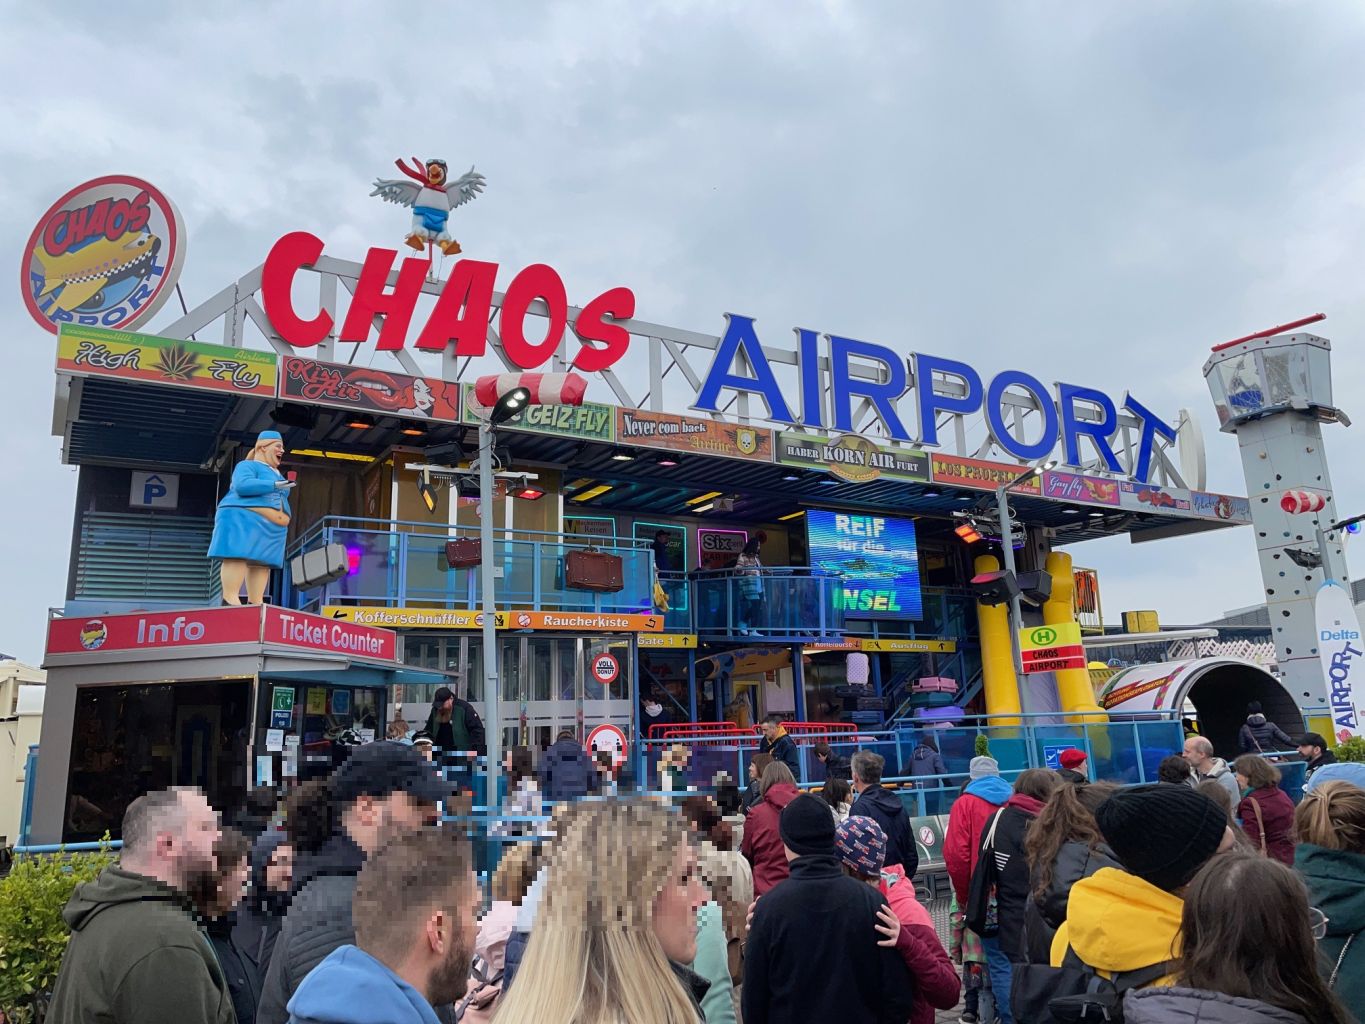 Chaos Airport